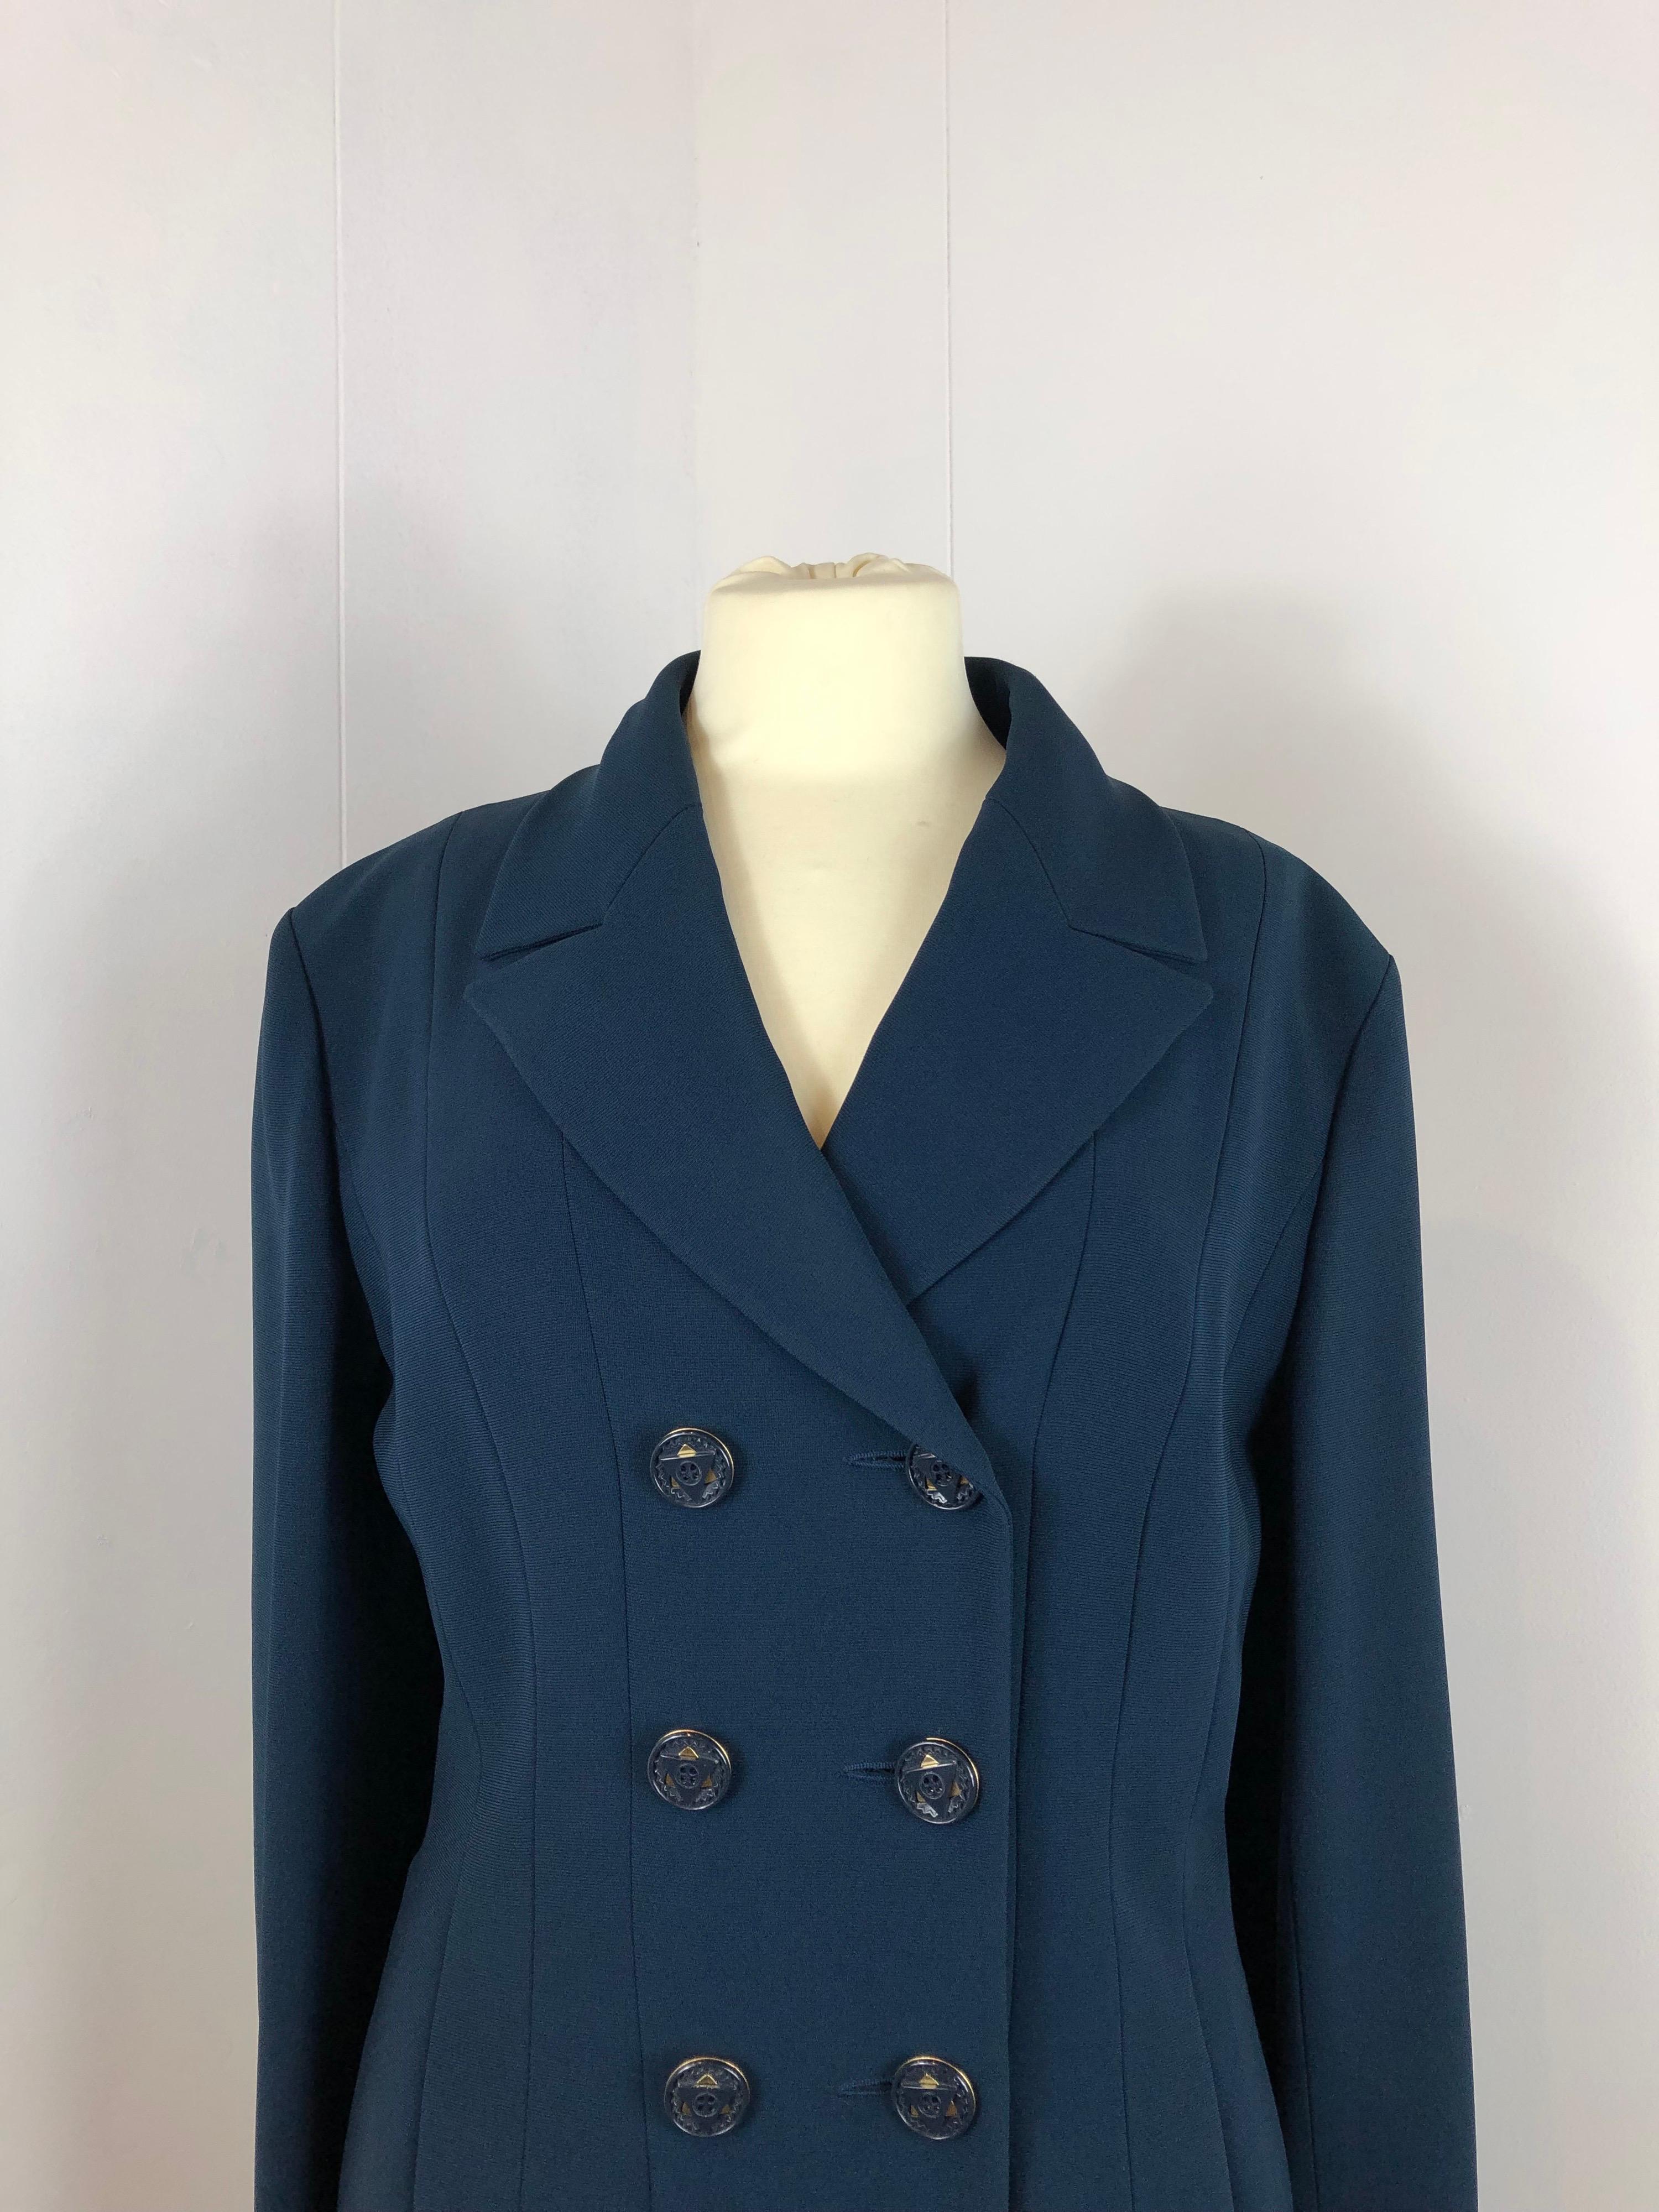 Karl Lagerfeld suit: jacket + skirt .
Both pieces are made in viscose and acetate. 
Both size 40.
Jacket is double breasted. Bottoms are a nice details and the jacket comes with more replaceable bottoms. 
Measurements: 
Shoulders 42 cm 
Bust 46 cm